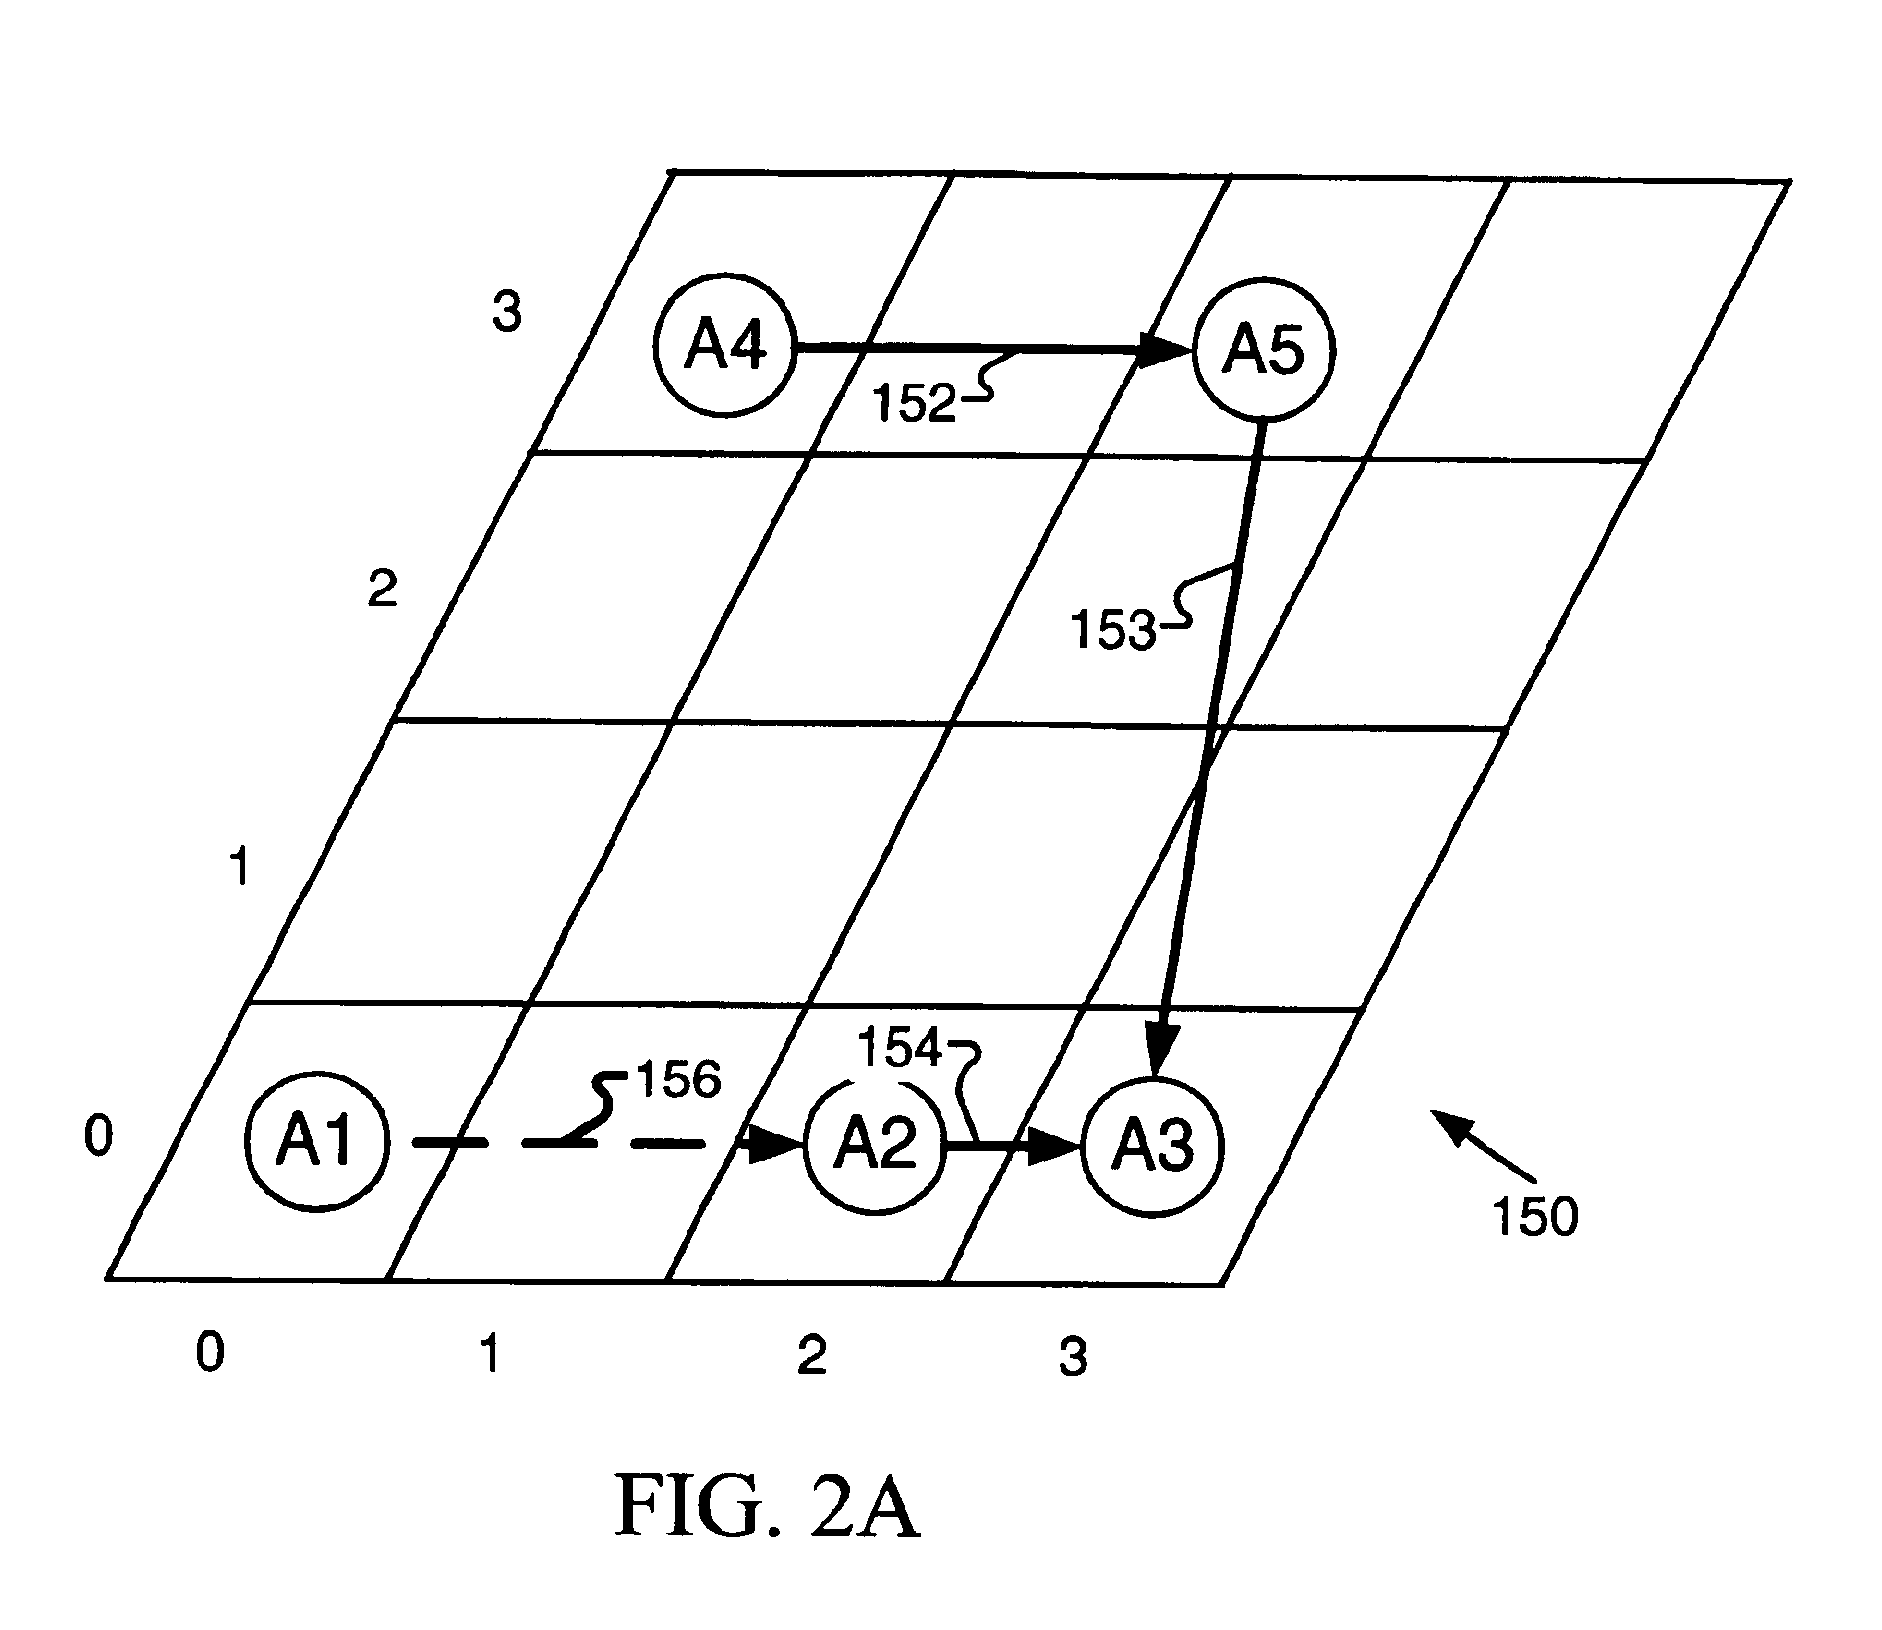 Incremental placement of design objects in integrated circuit design